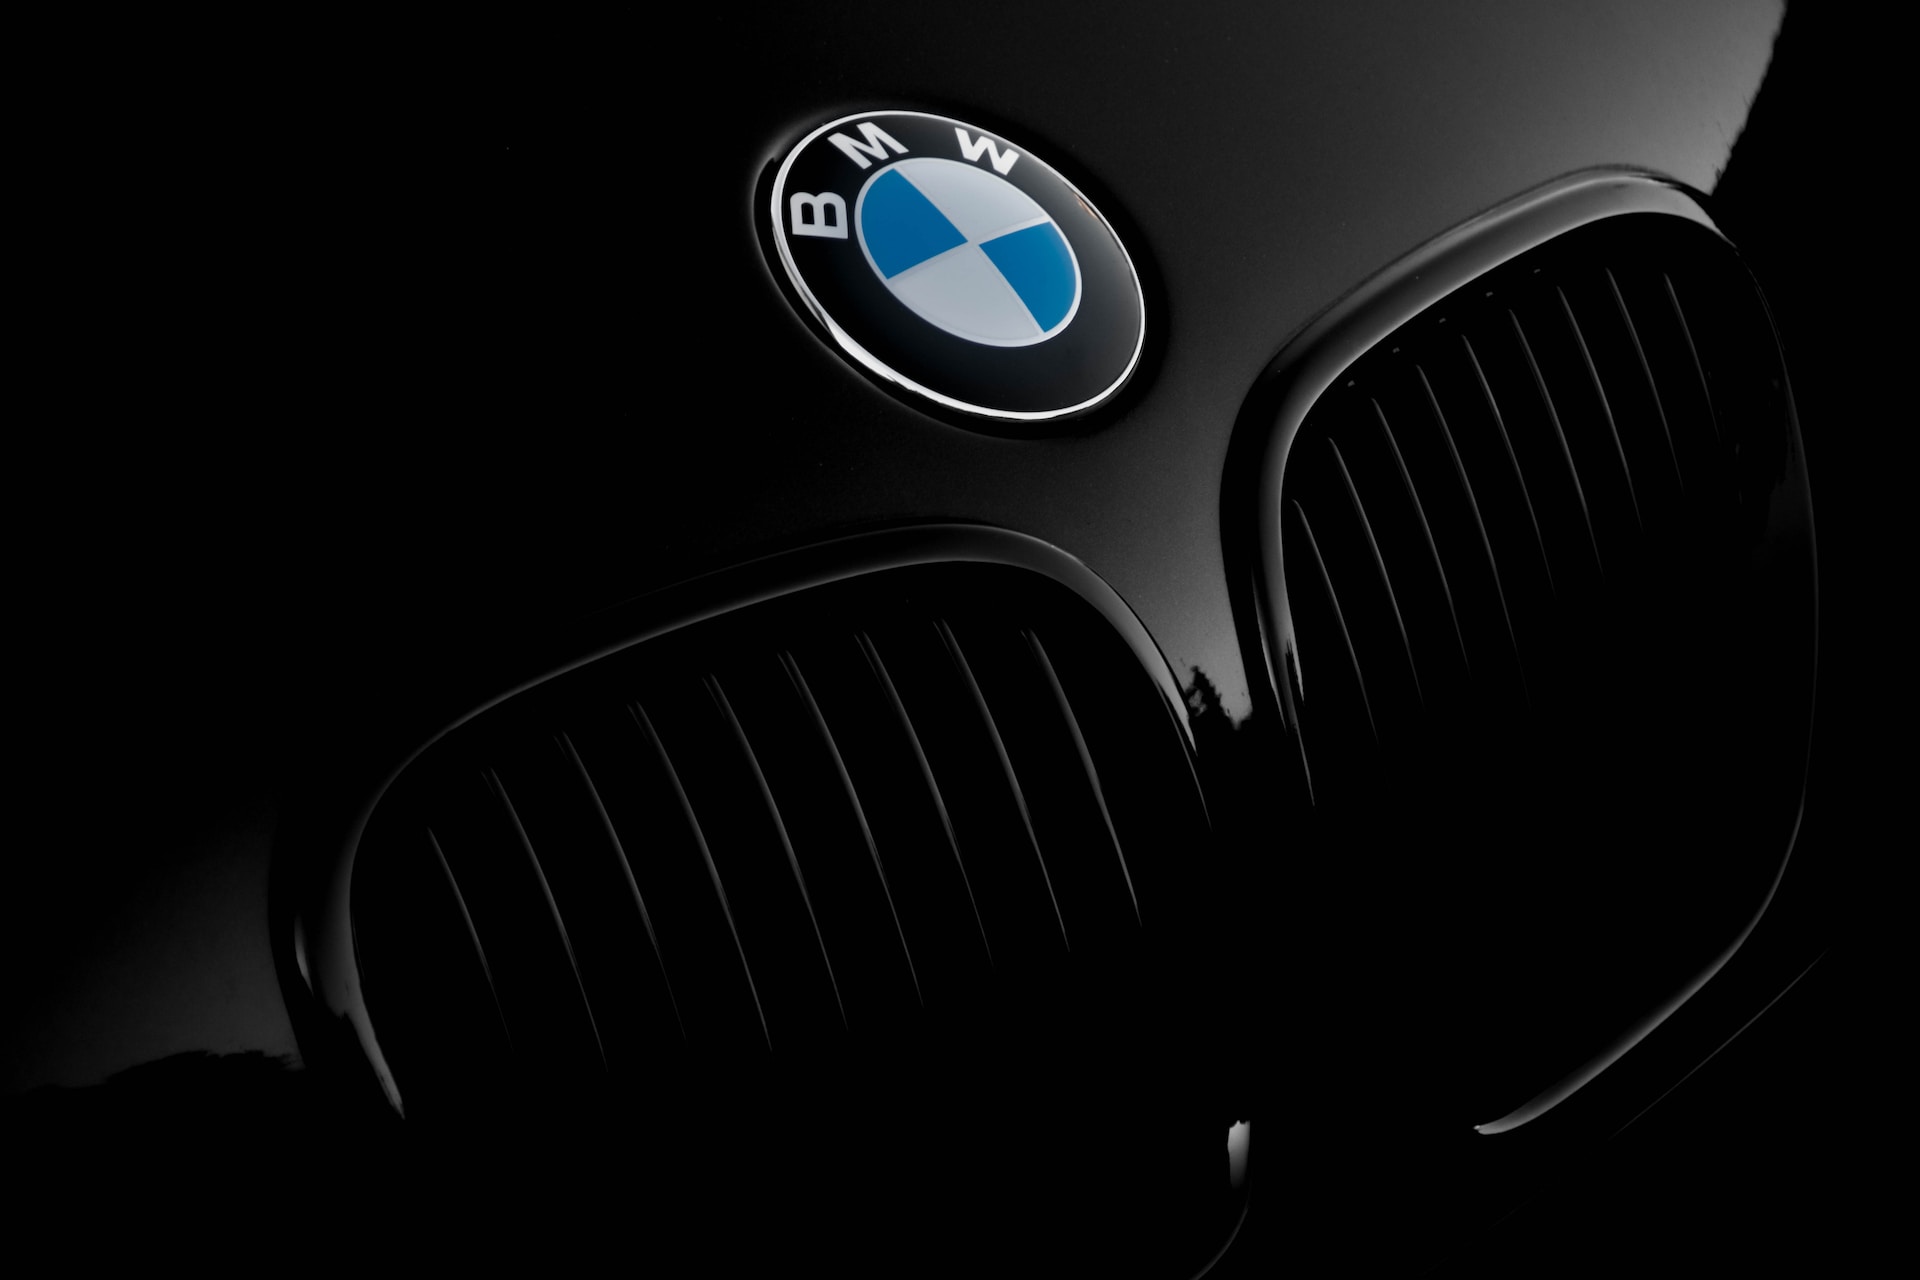 BMW has made efforts to implement VR into its vehicles for about ten years